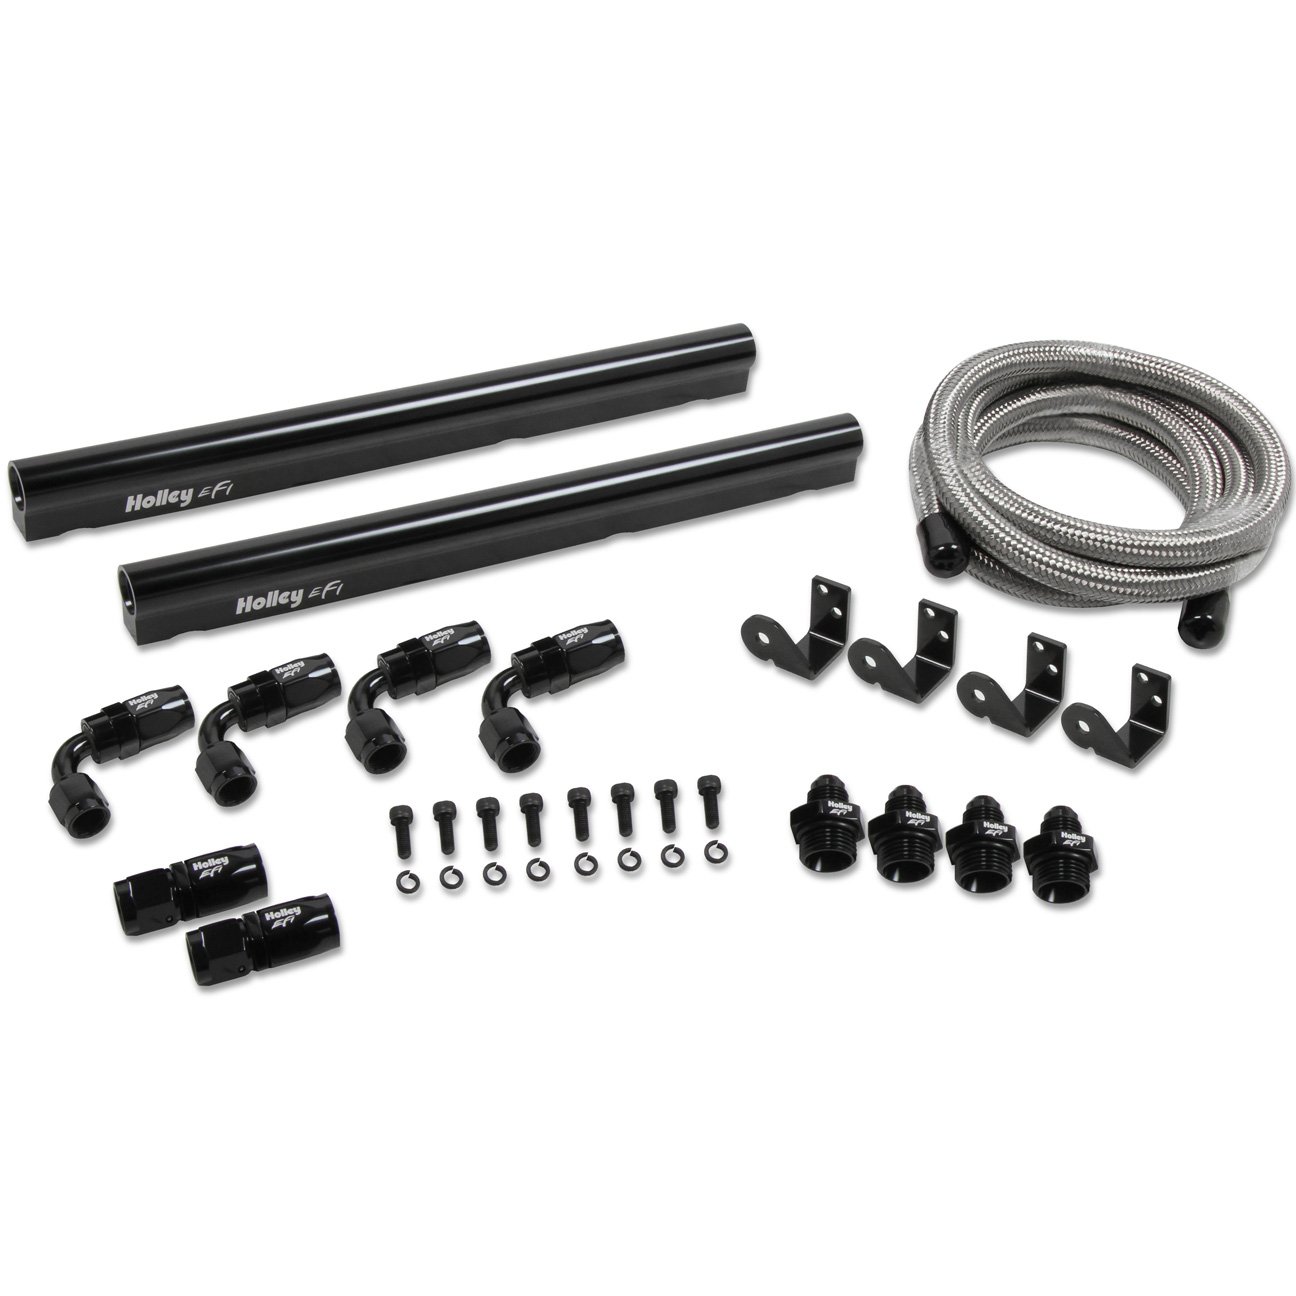 Holley 534 233 Fuel Rail Kit Jegs